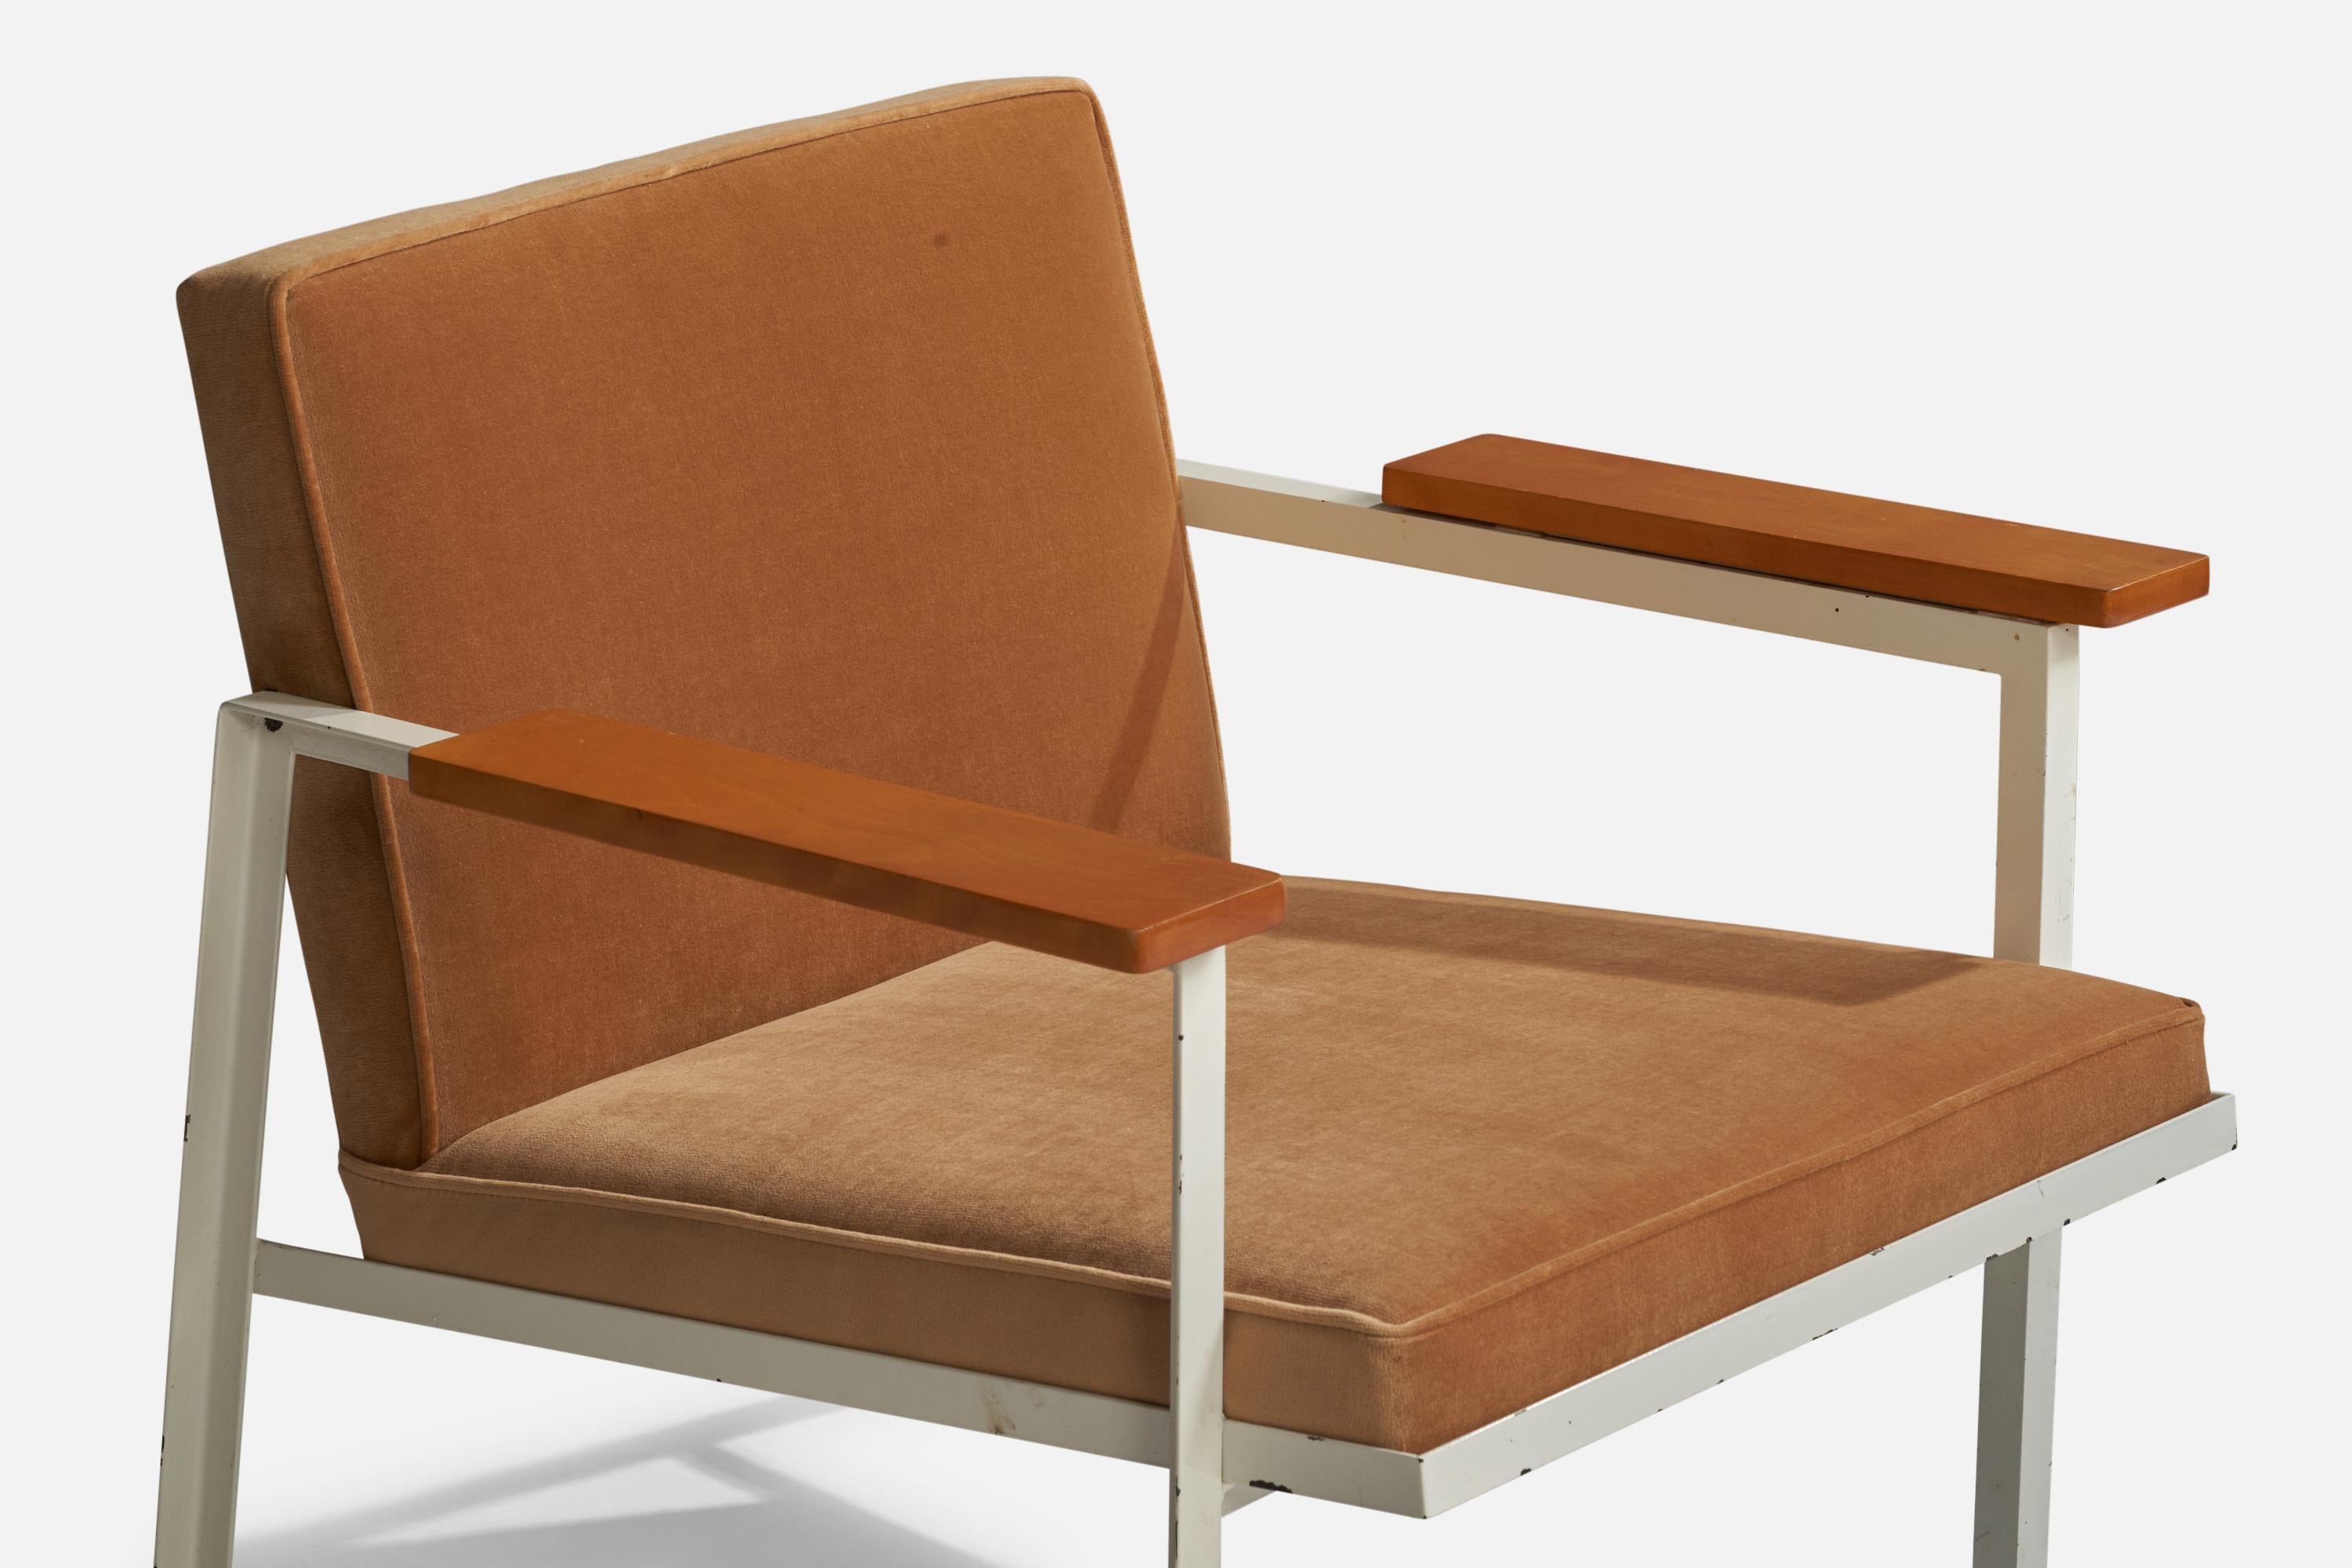 George Nelson, Lounge Chairs, Wood, Steel, Velvet, USA, 1950s For Sale 1